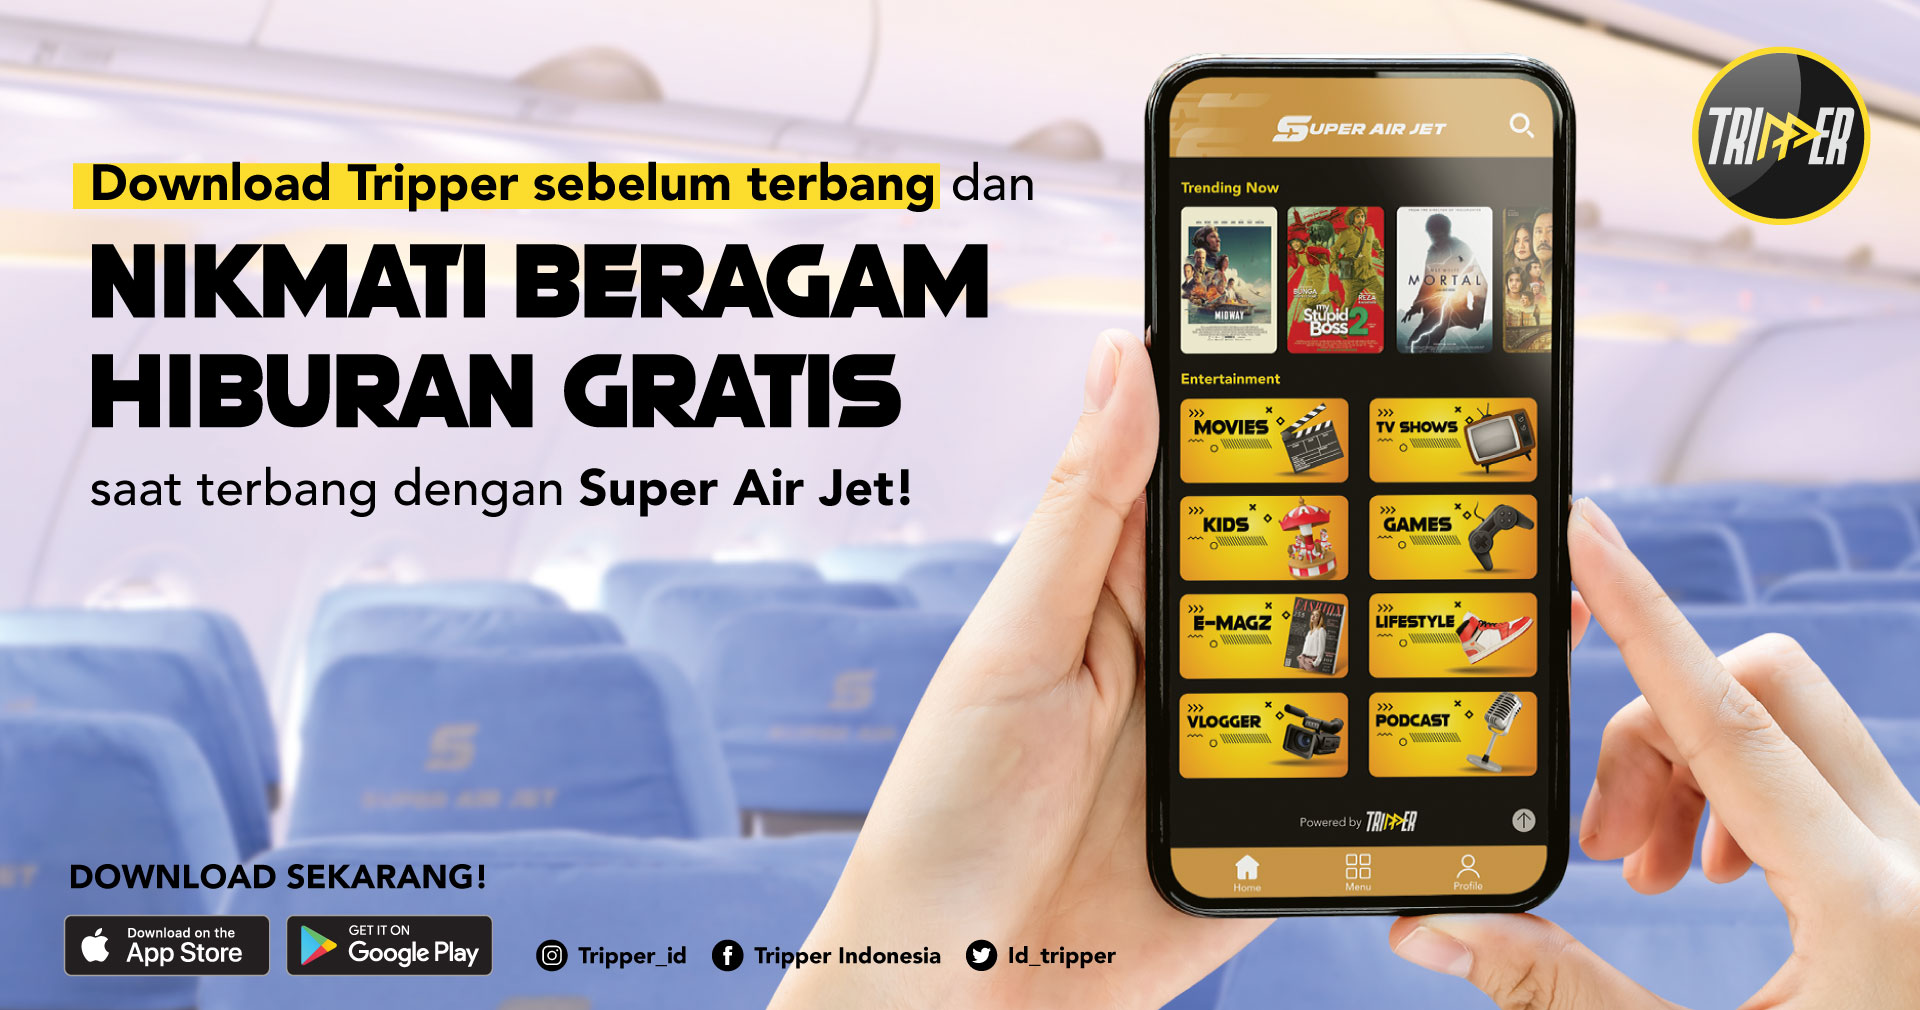 Super check air online jet in Check